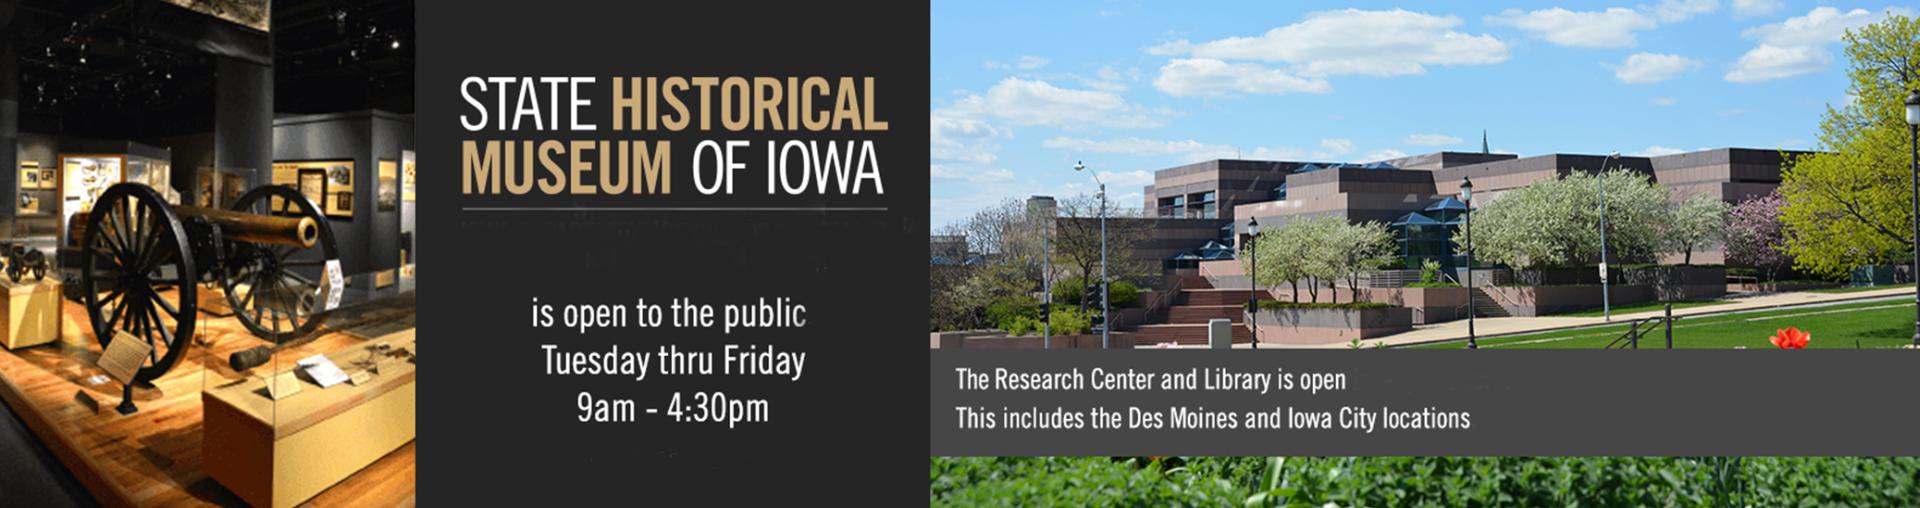 State Historical Museum of Iowa Main Page banner